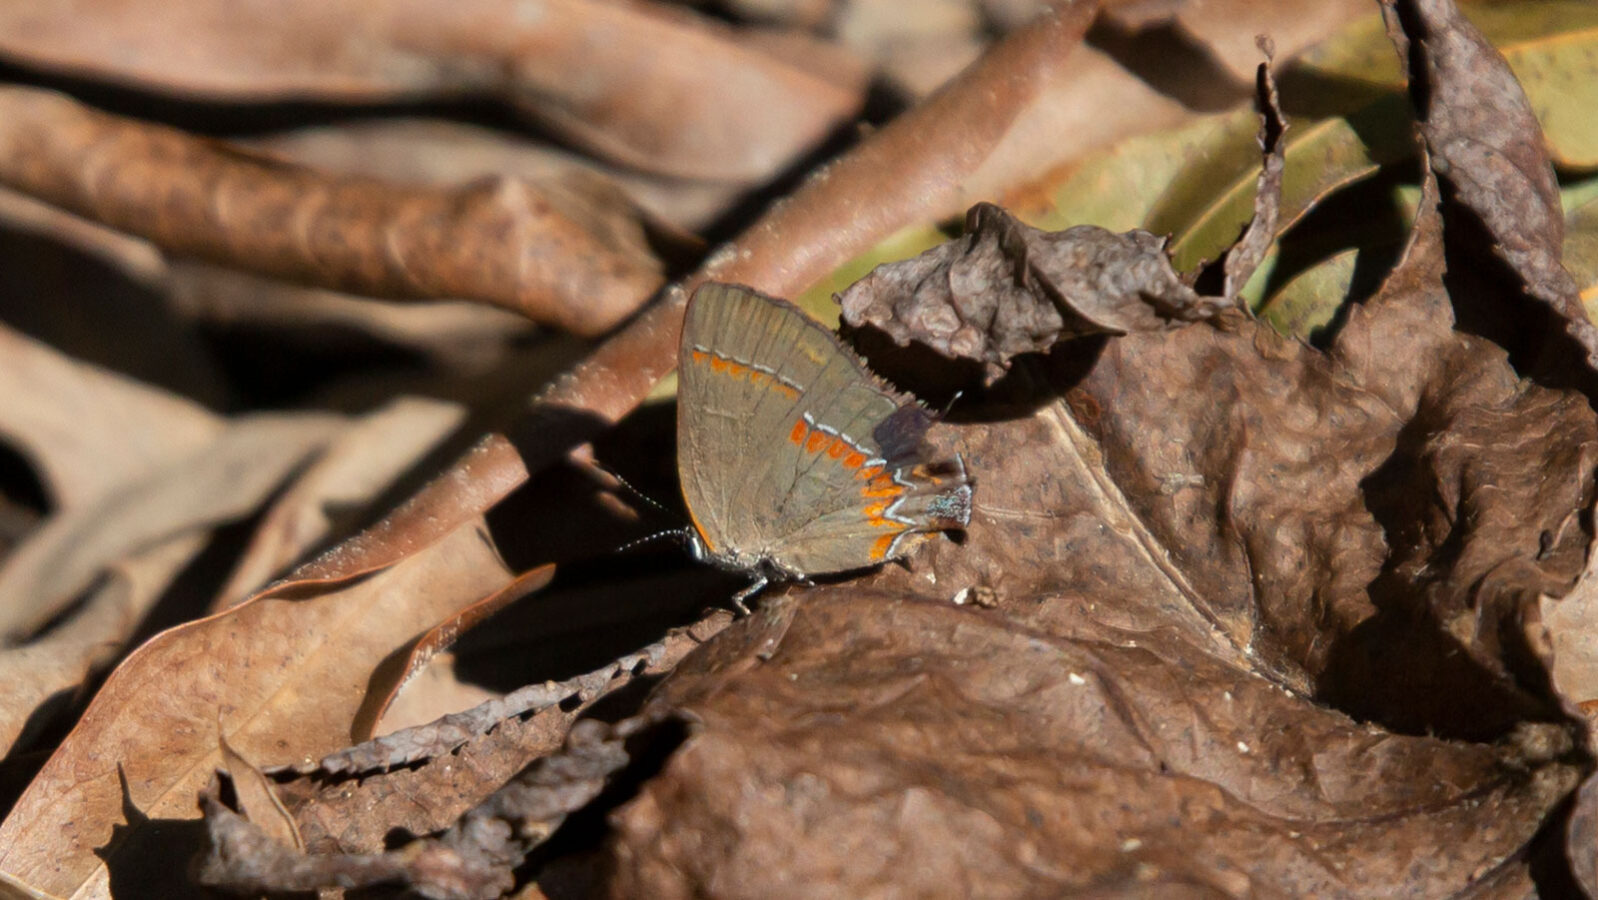 Red-banded hairstreak butterfly foraging on dead leaves